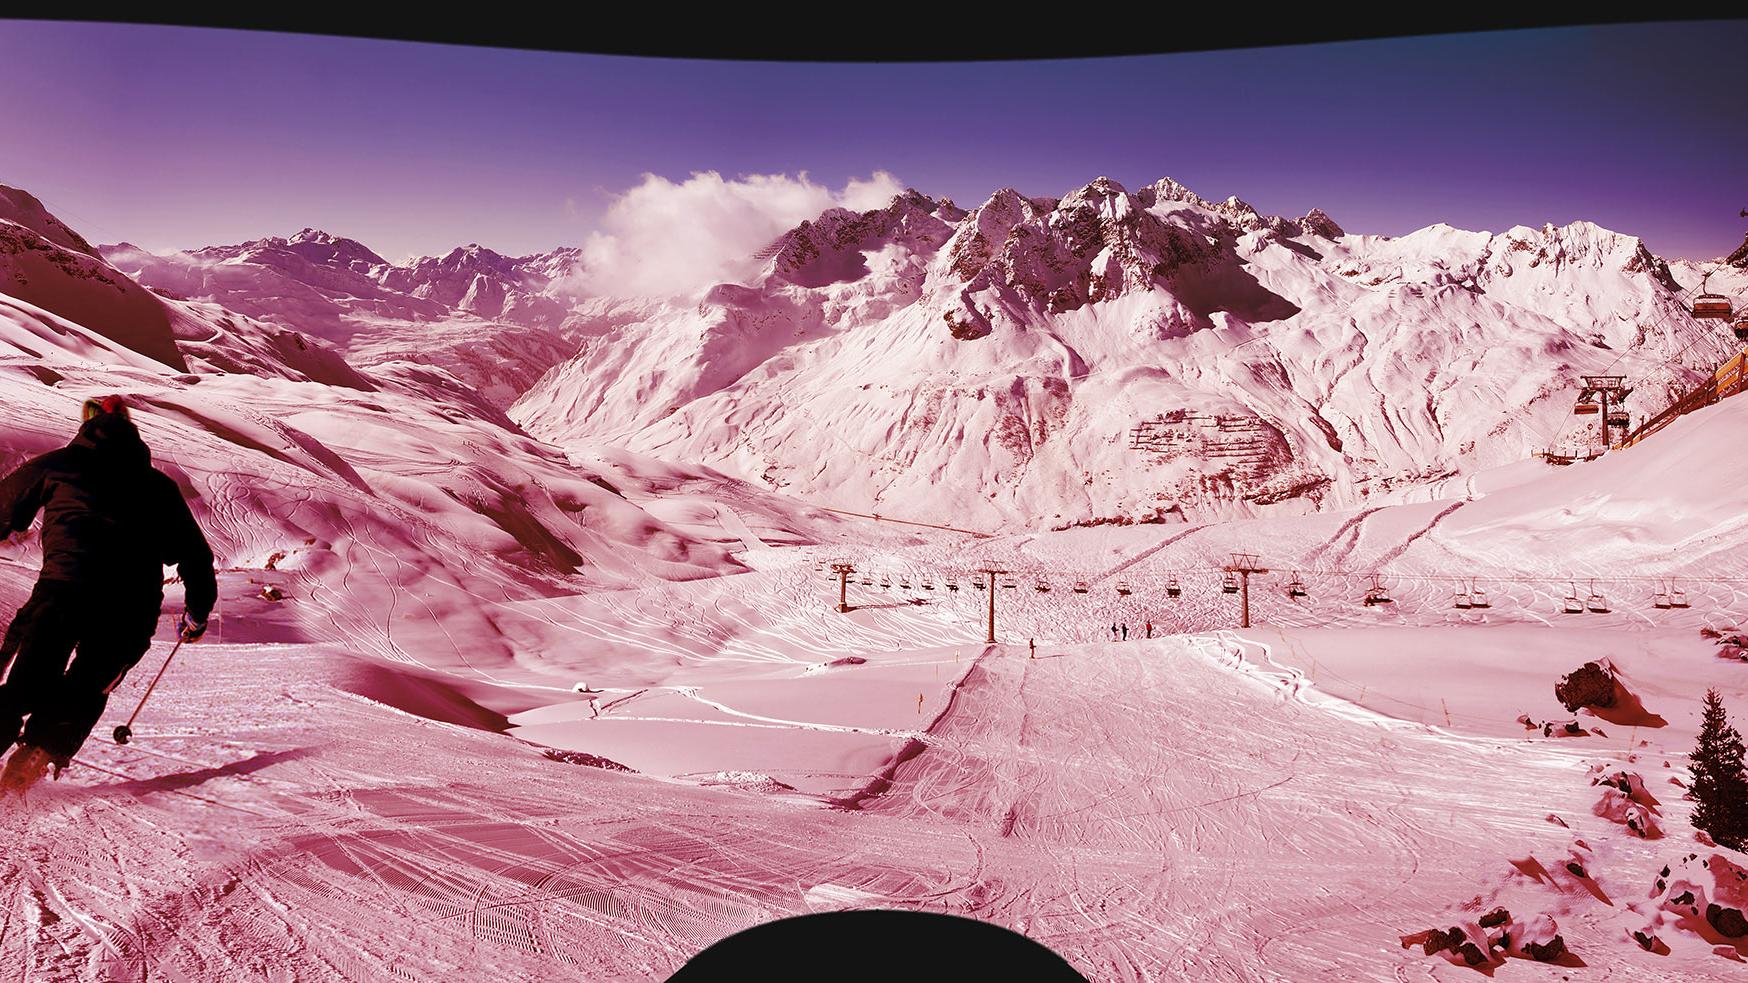 Field of view of ZEISS snow goggles